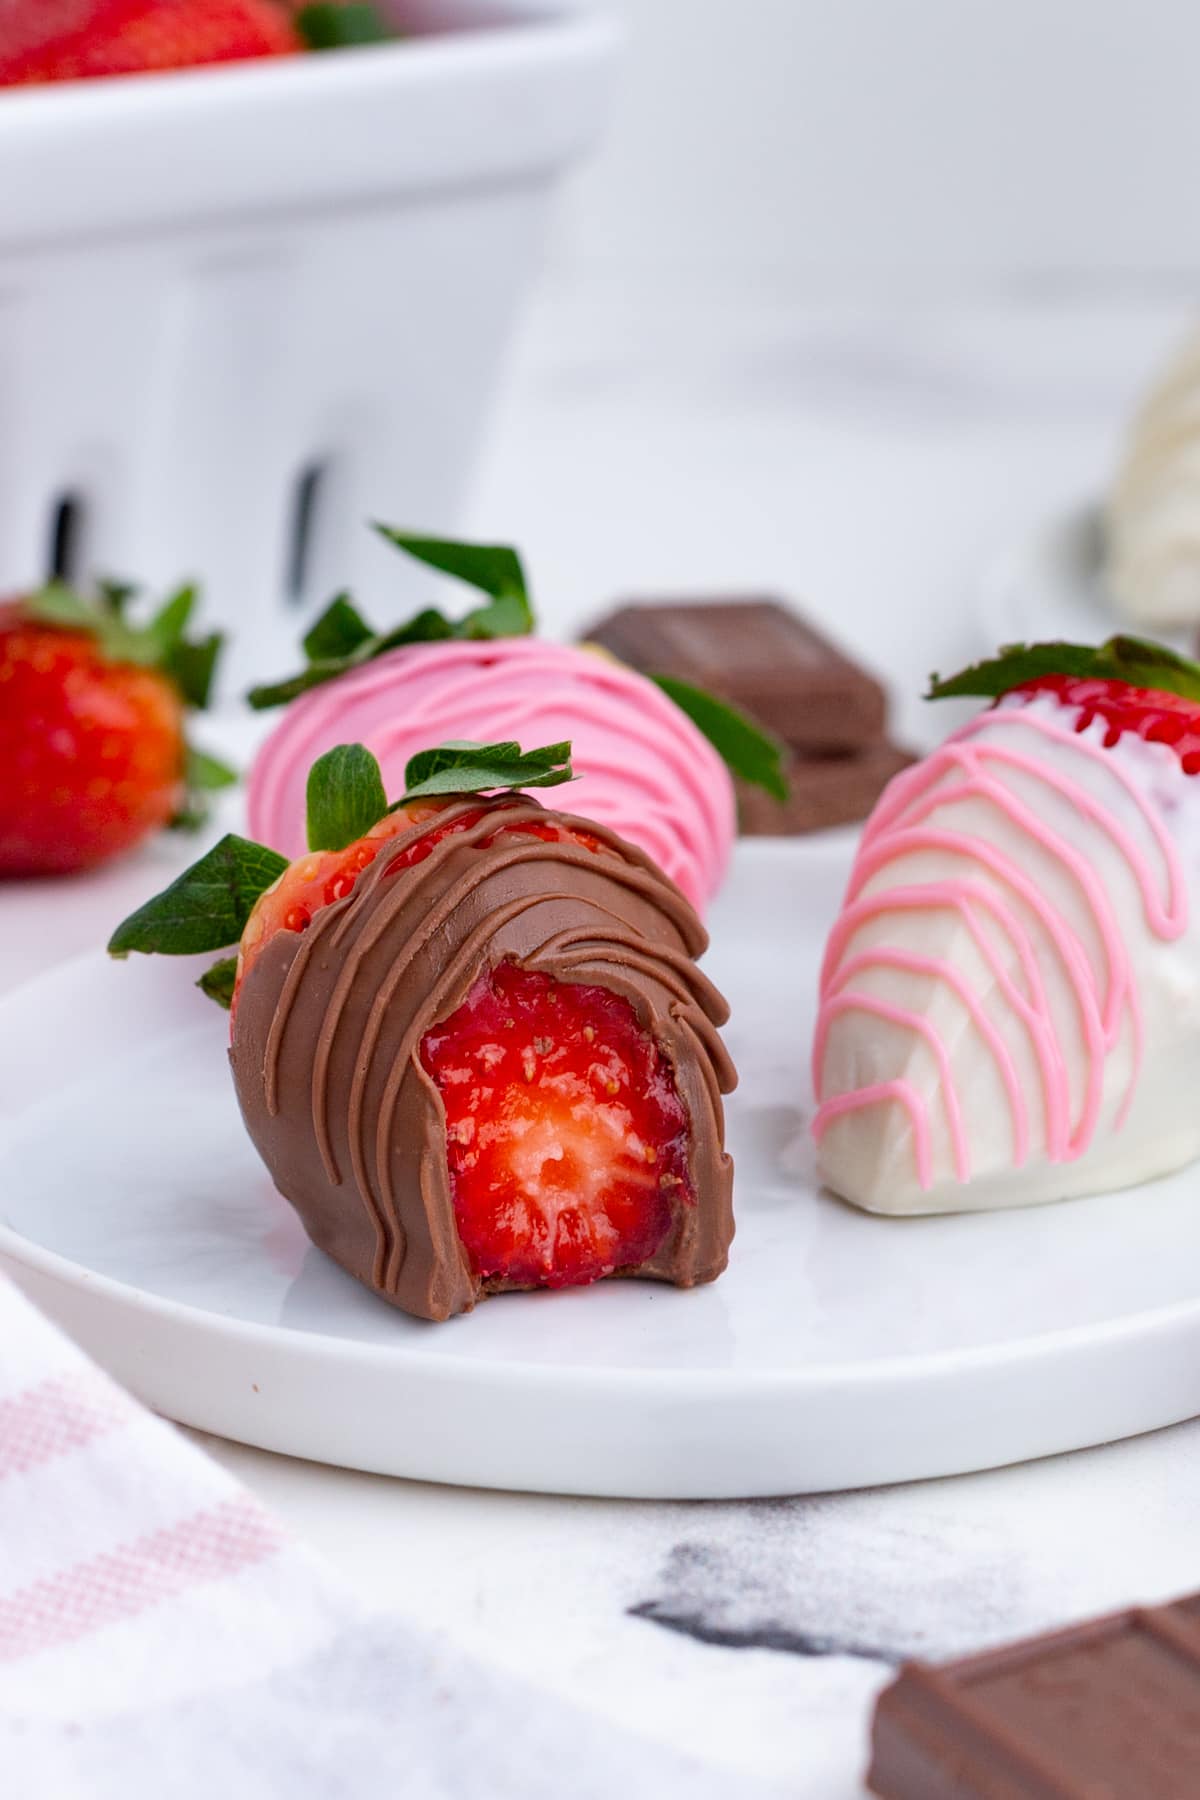 Chocolate covered strawberries with a bite